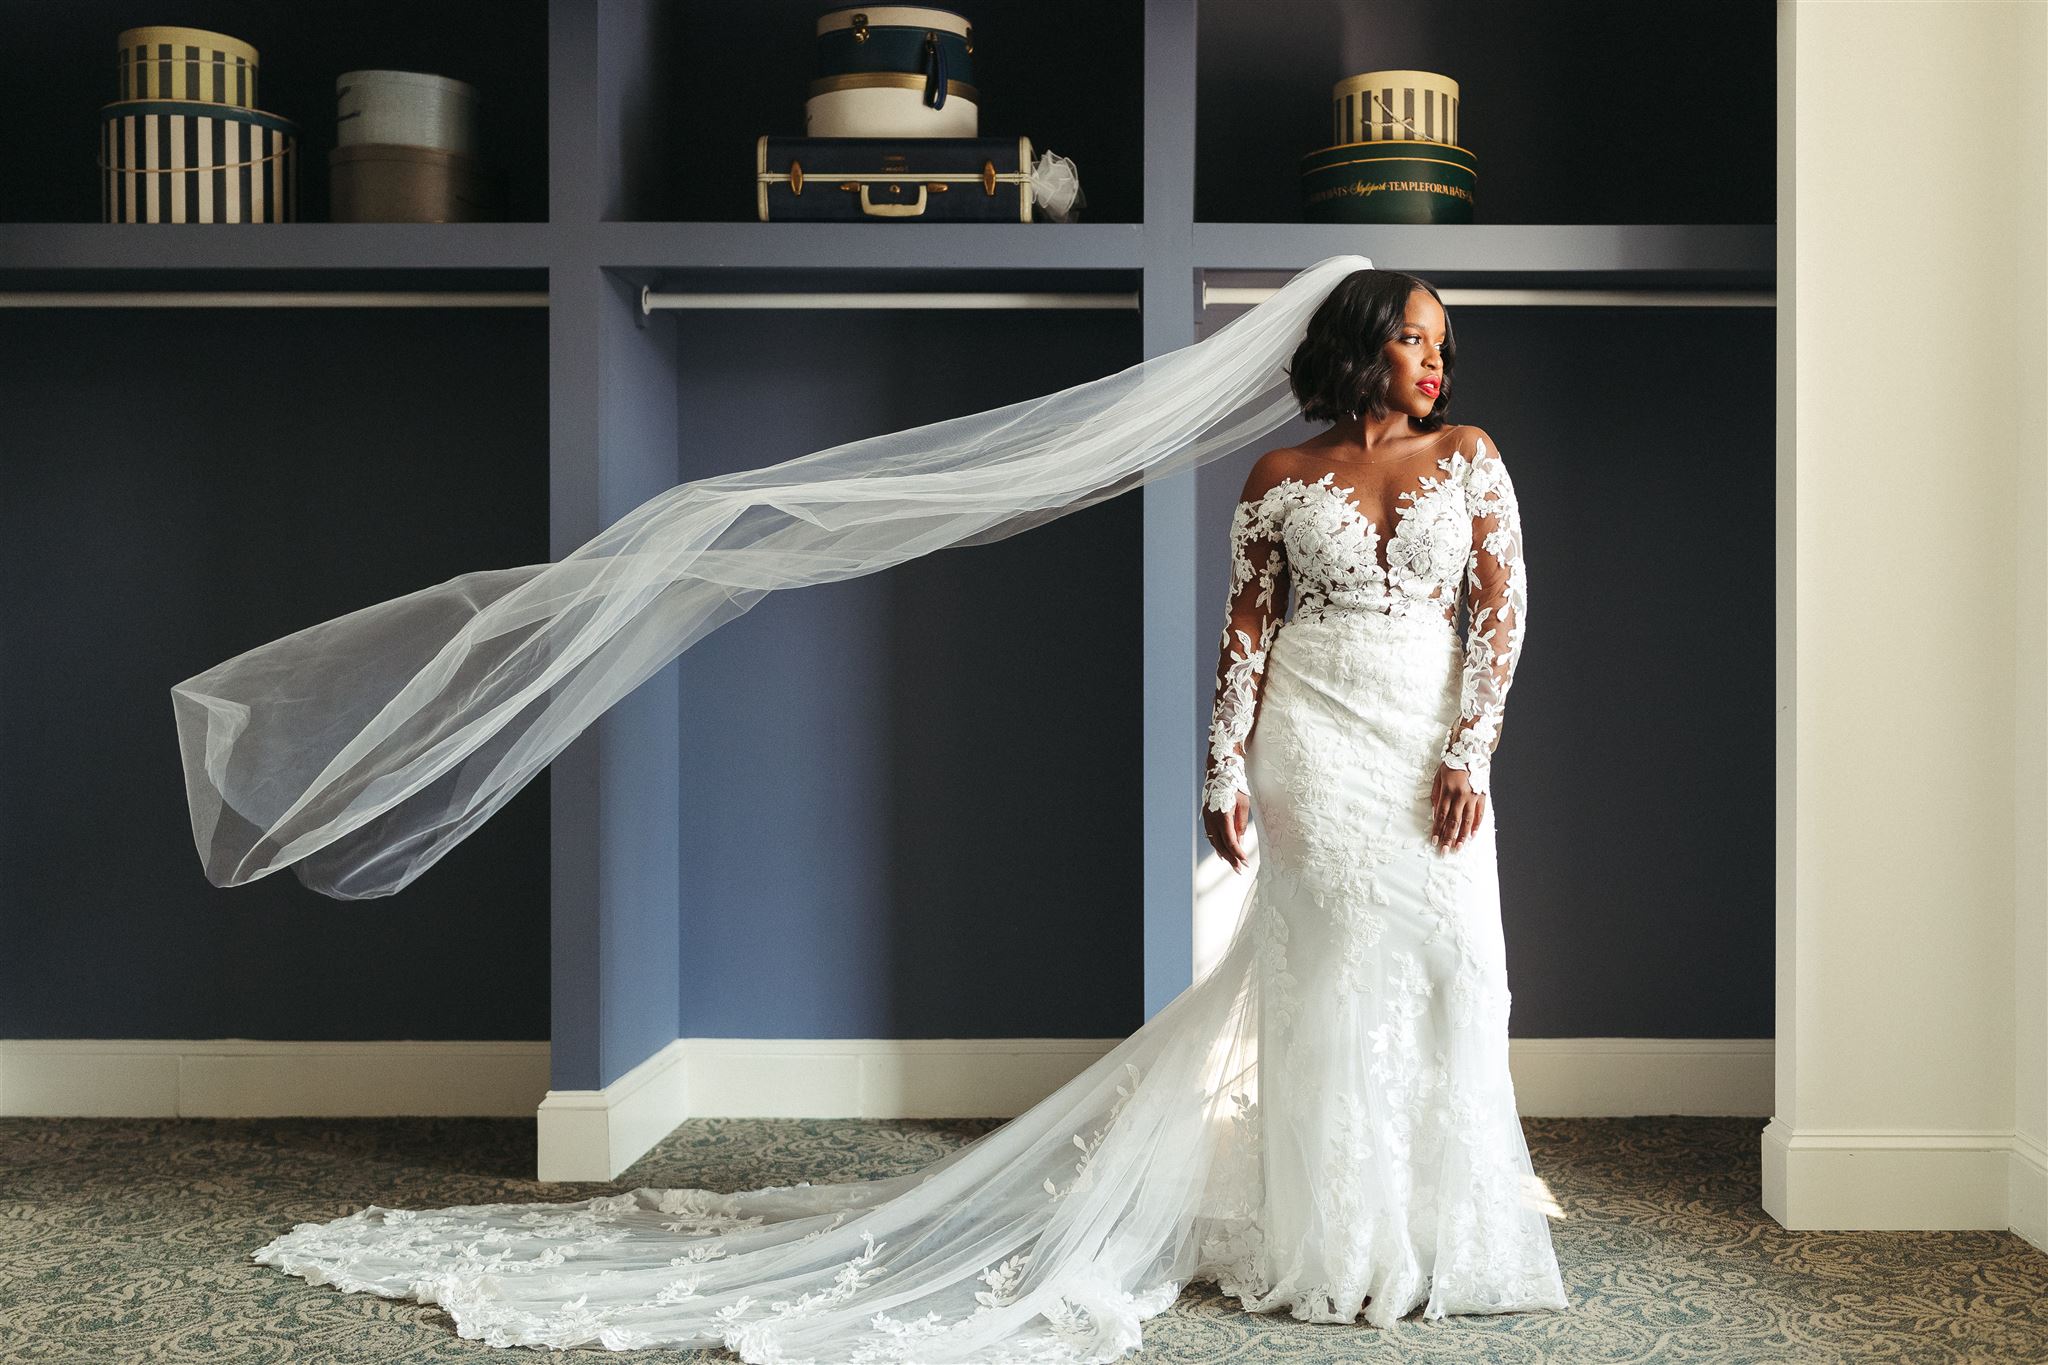 Bride looking stunning as she stares off into the distance with her sheer veil in the air, photographed by Jason Moody